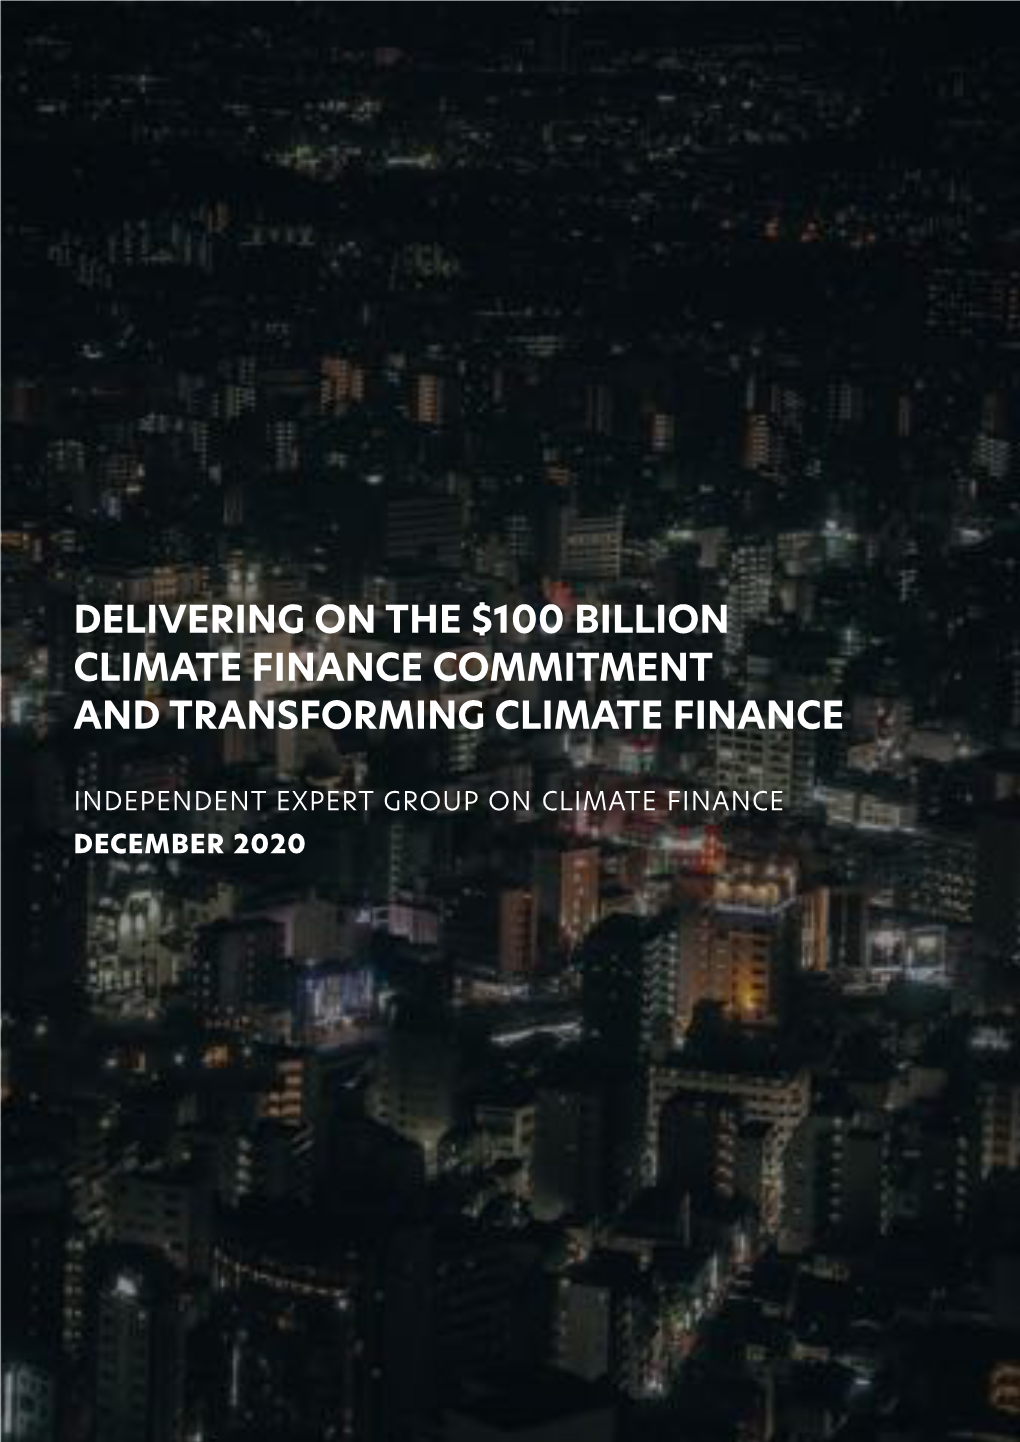 Delivering on the $100 Billion Climate Finance Commitment and Transforming Climate Finance